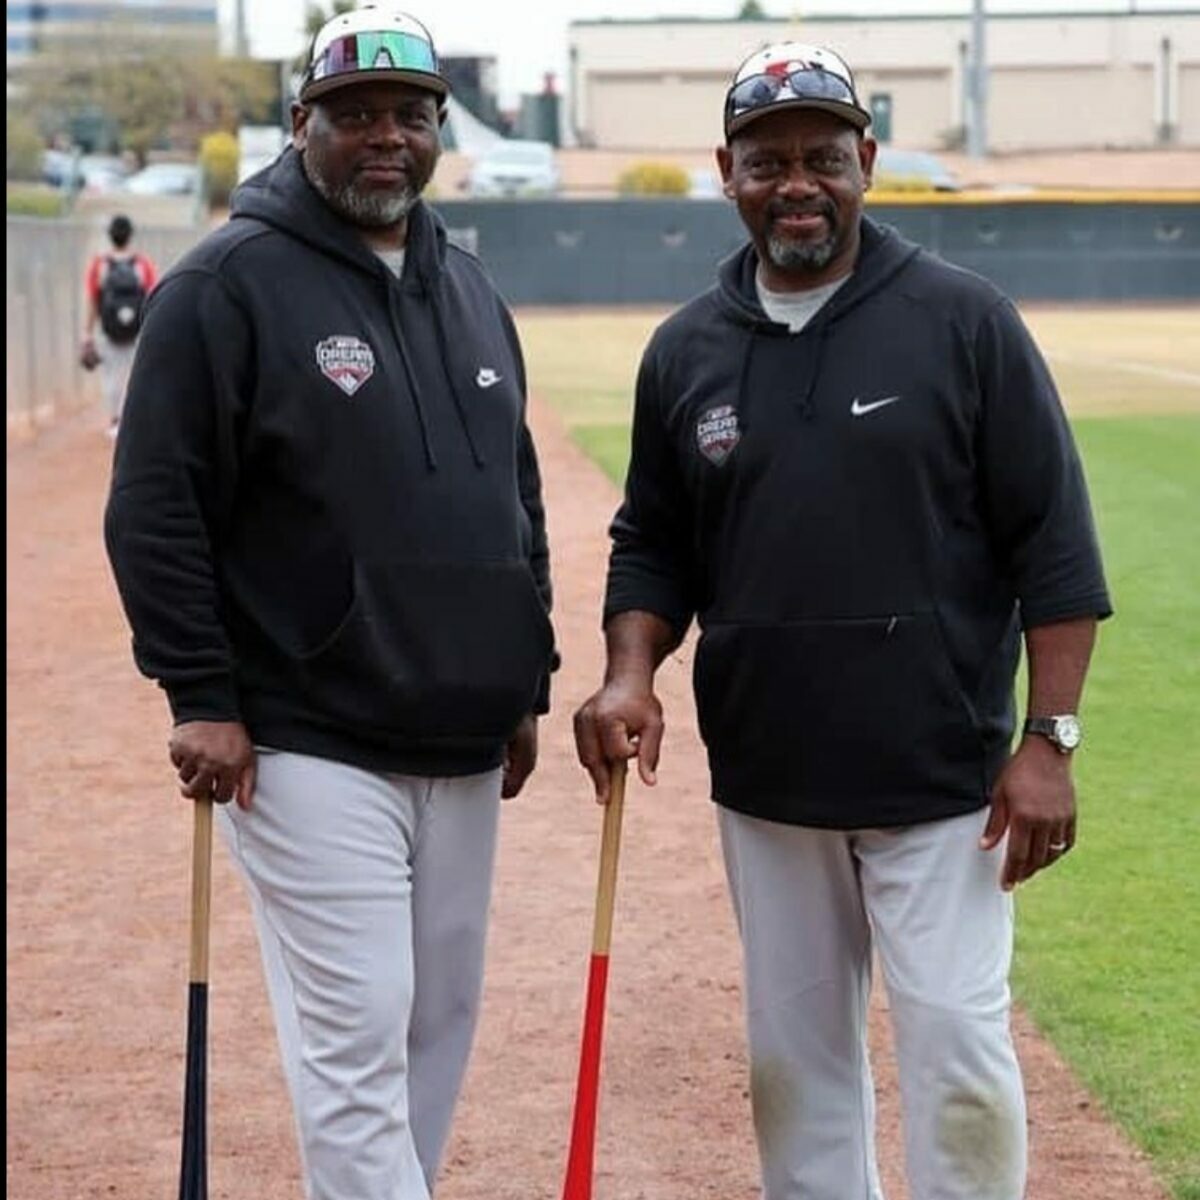 Marquis Grissom with his friend at mlb coaching centre